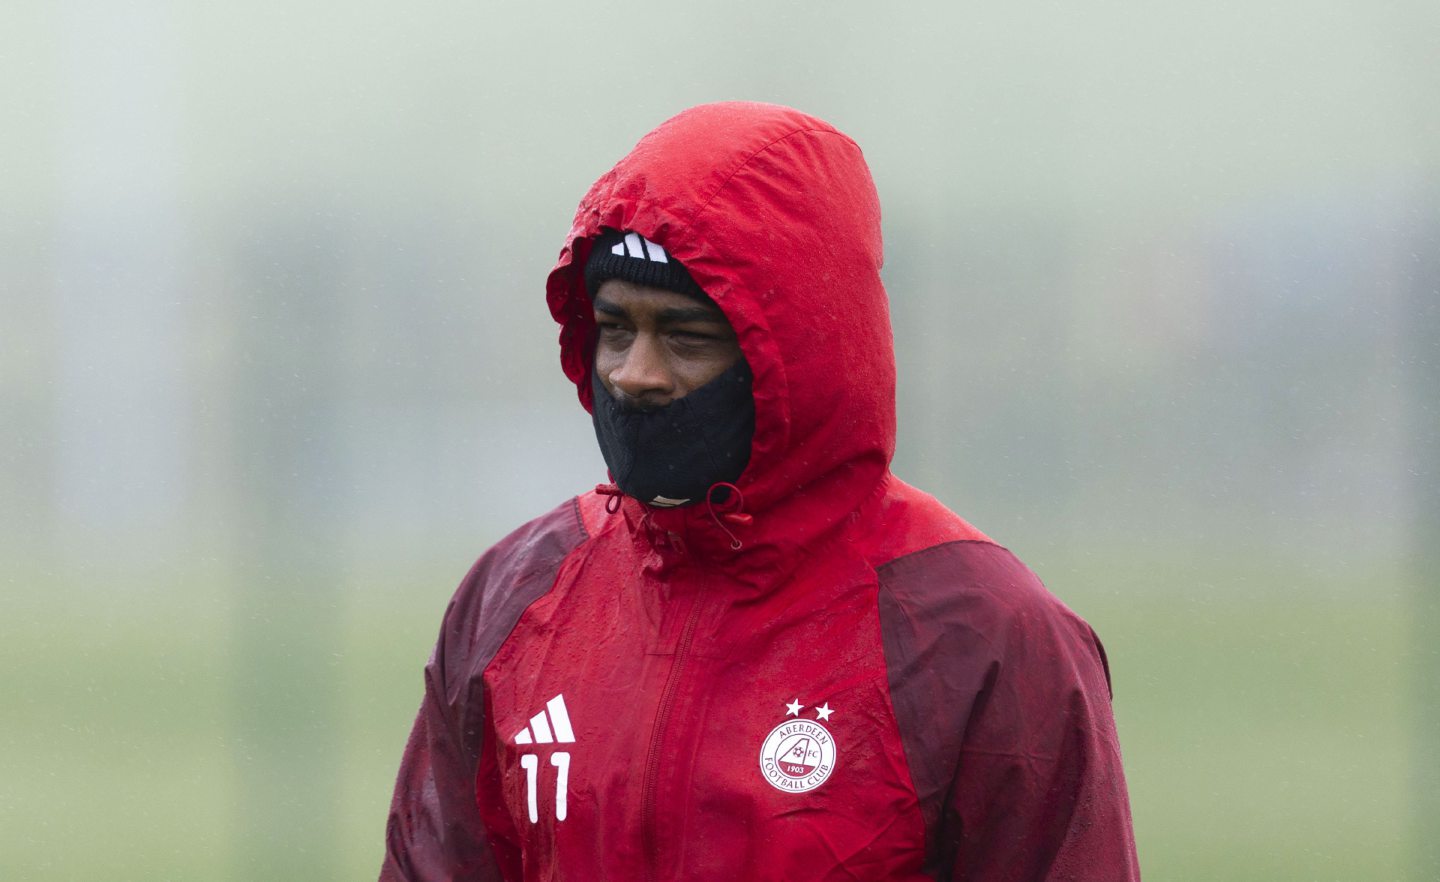 Aberdeen striker Duk braving the cold snap in April during a training session at Cormack Park ahead of the trip to Livingston. Image: SNS 